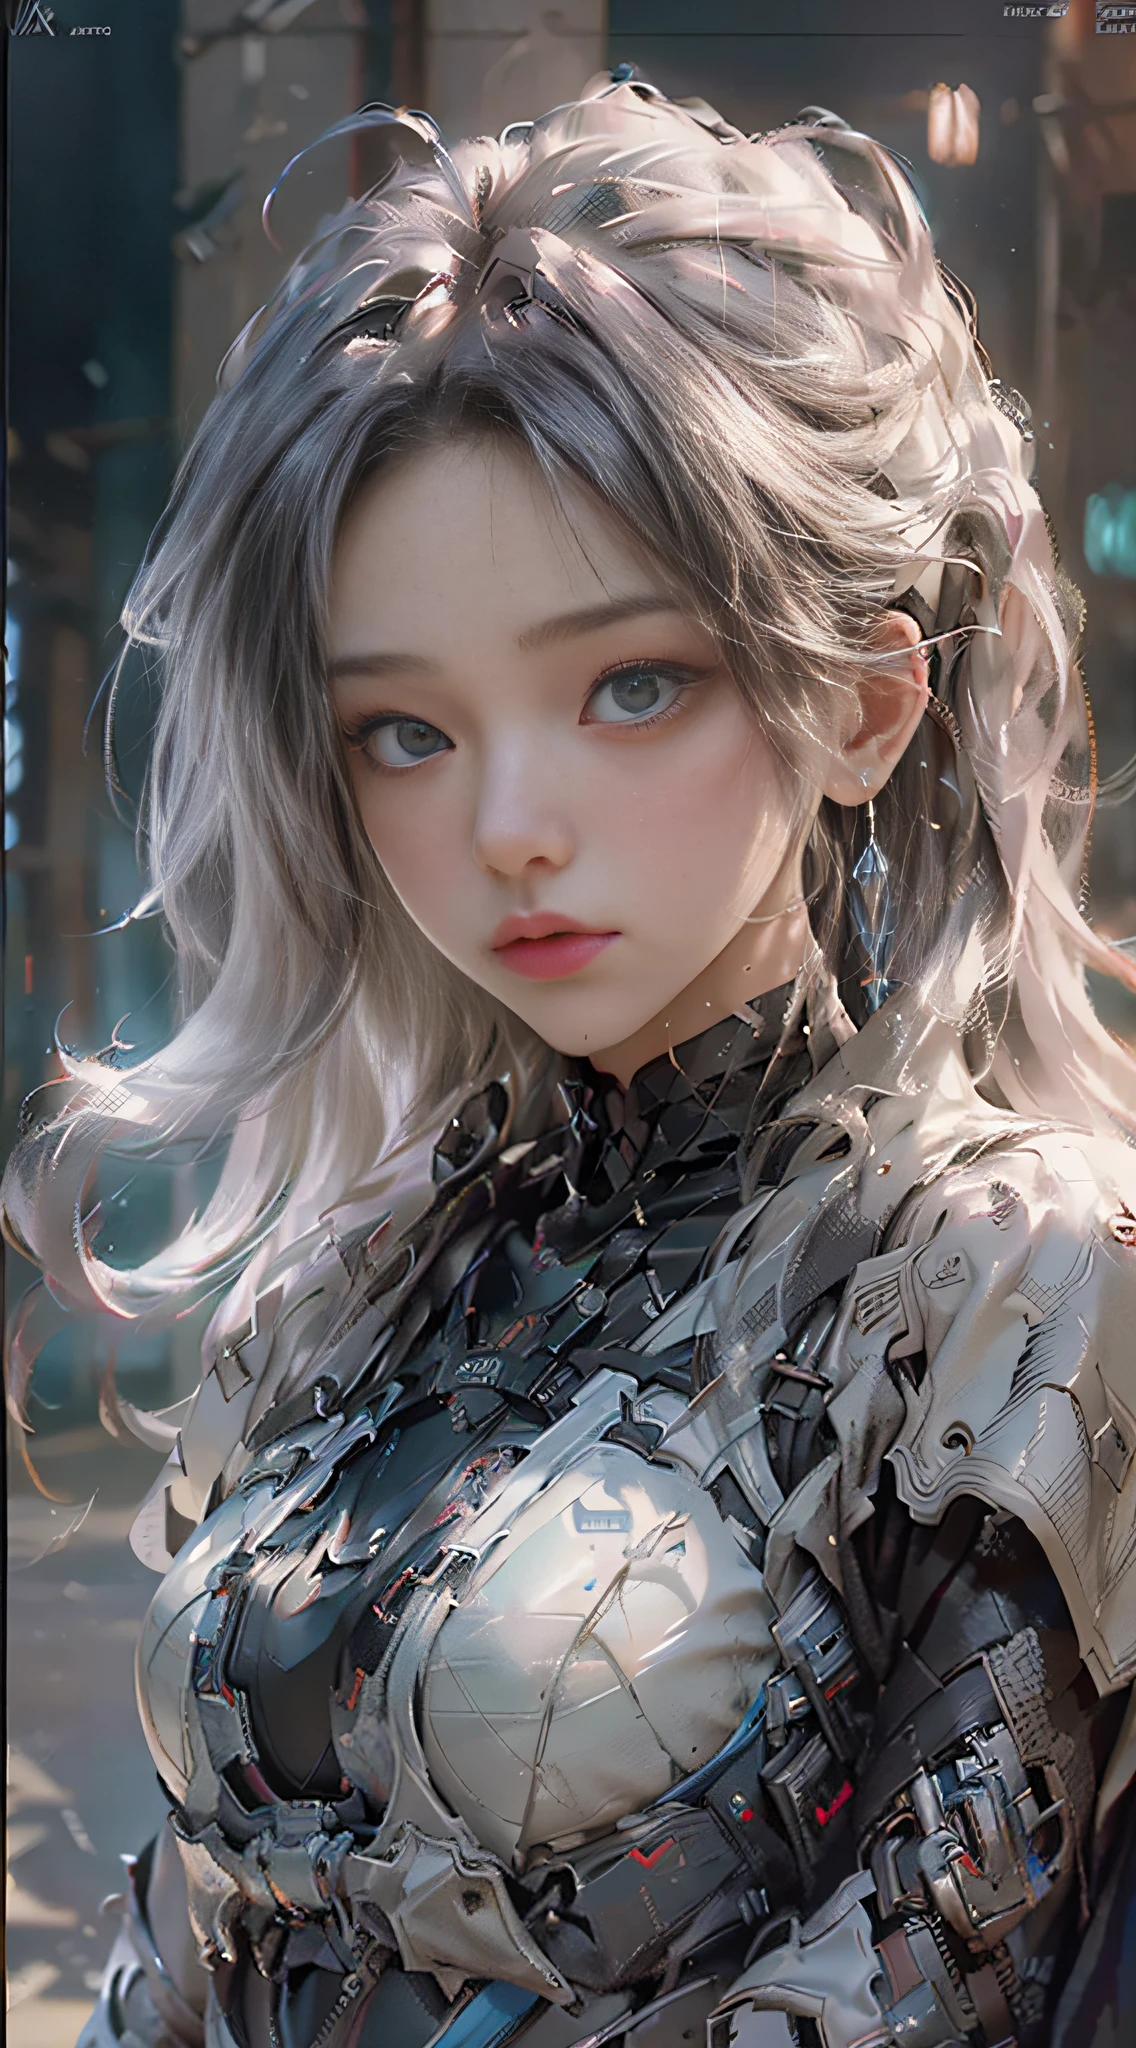 ((Best Quality)), ((Masterpiece)), (Detail: 1.4), (Extremely Detailed CG Uniform 8k Wallpaper), 3D, A Beautiful Cyberpunk Female Figure, HDR (High Dynamic Range), Ray Tracing, NVIDIA RTX, Super-Resolution, Unreal 5, Subsurface Scattering, PBR Texture, Post-processing, Anisotropy Filtering, Depth of Field, Maximum Sharpness and Sharpness, Multi-layer Texture, Albedo and Highlight Maps, Surface coloring, precise simulation of light-material interactions, perfect proportions, Octane Render, two-color light, large aperture, low ISO, white balance, rule of thirds, 8K RAW, finger detailing, refined facial features, focus on the face